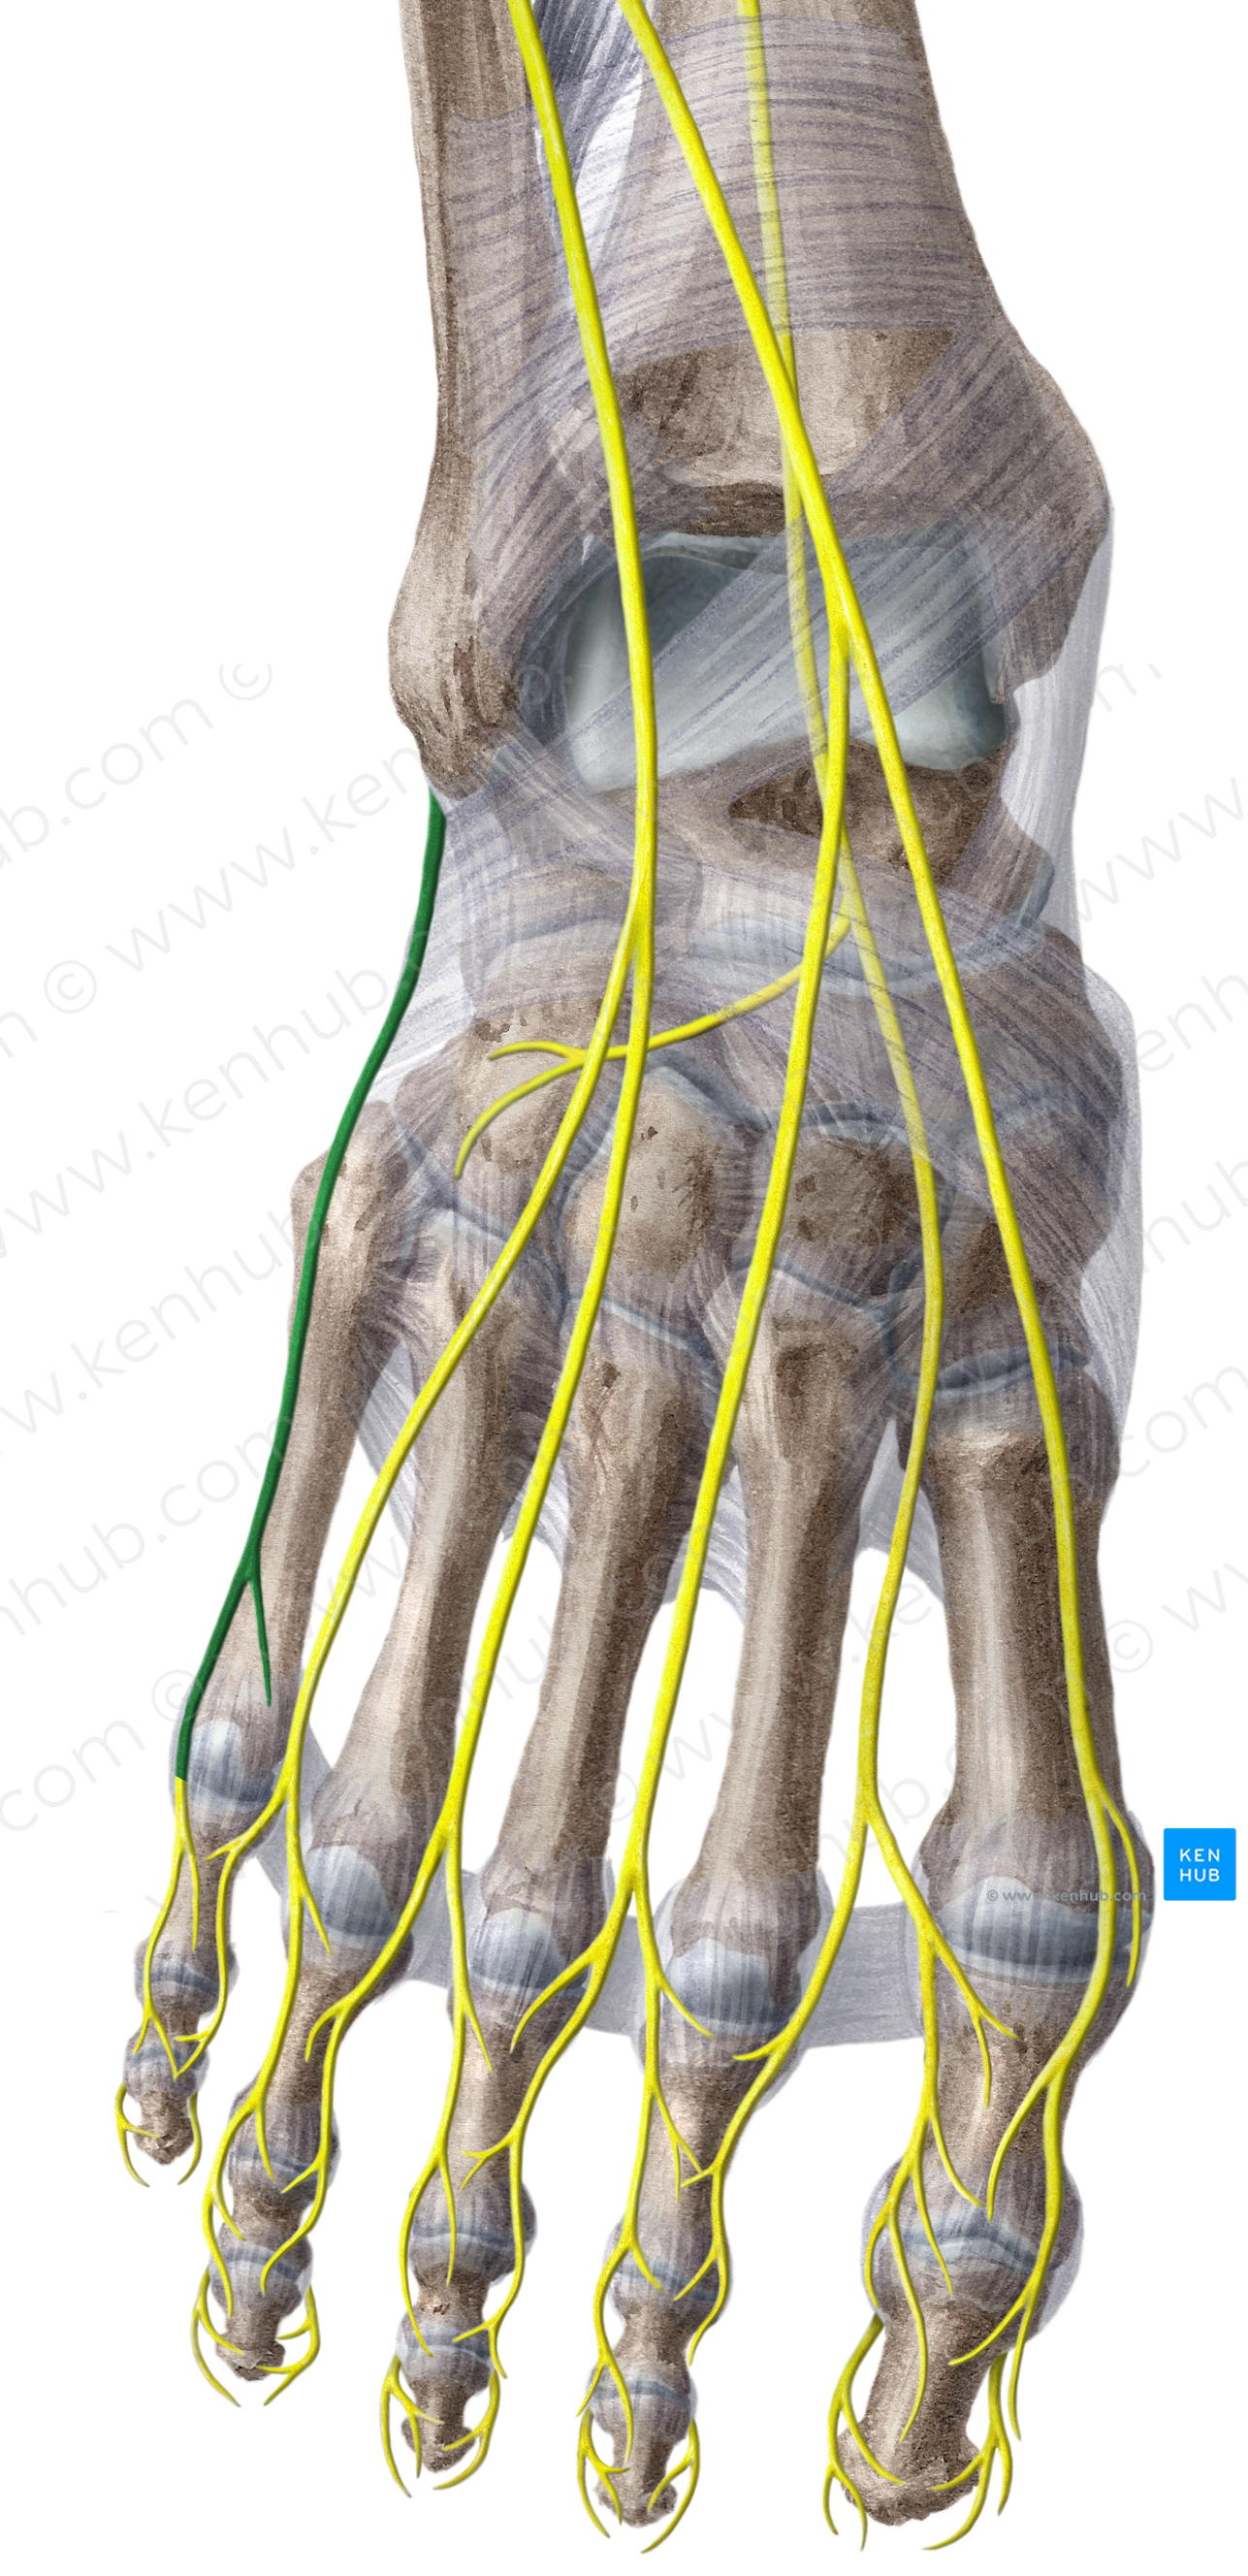 Lateral dorsal cutaneous nerve of foot (#6375)